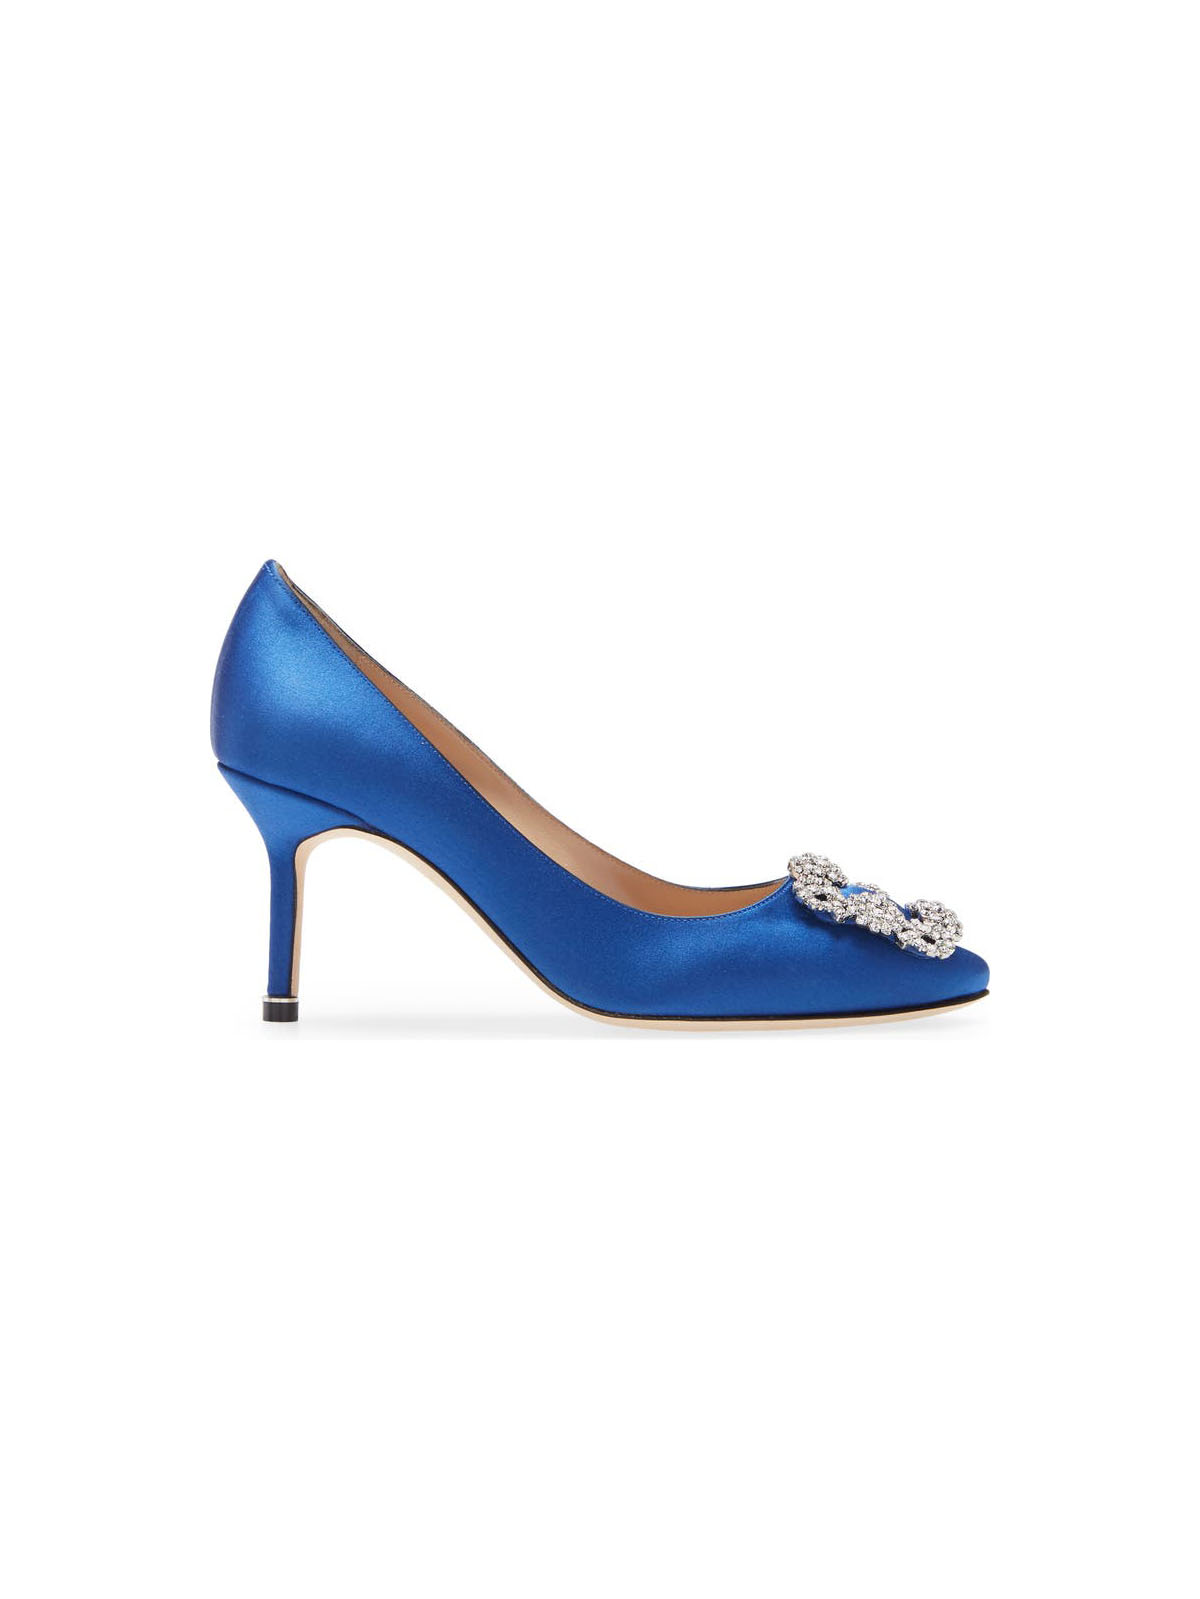 These Are the All-Time Greatest Manolo Blahnik Heels | Who What Wear